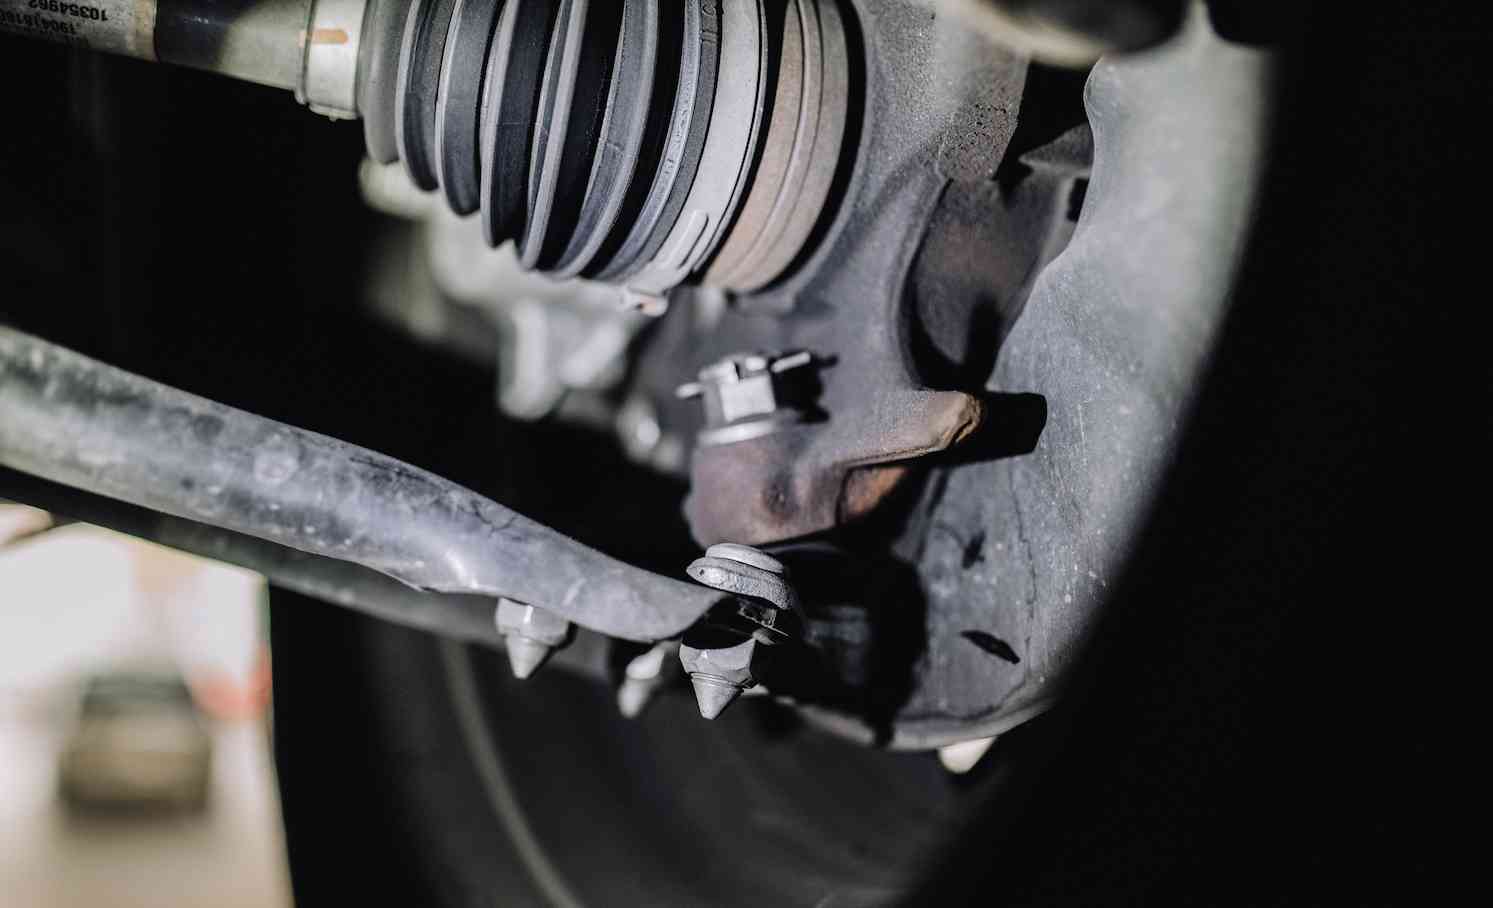 Control arm bushing - what is it?